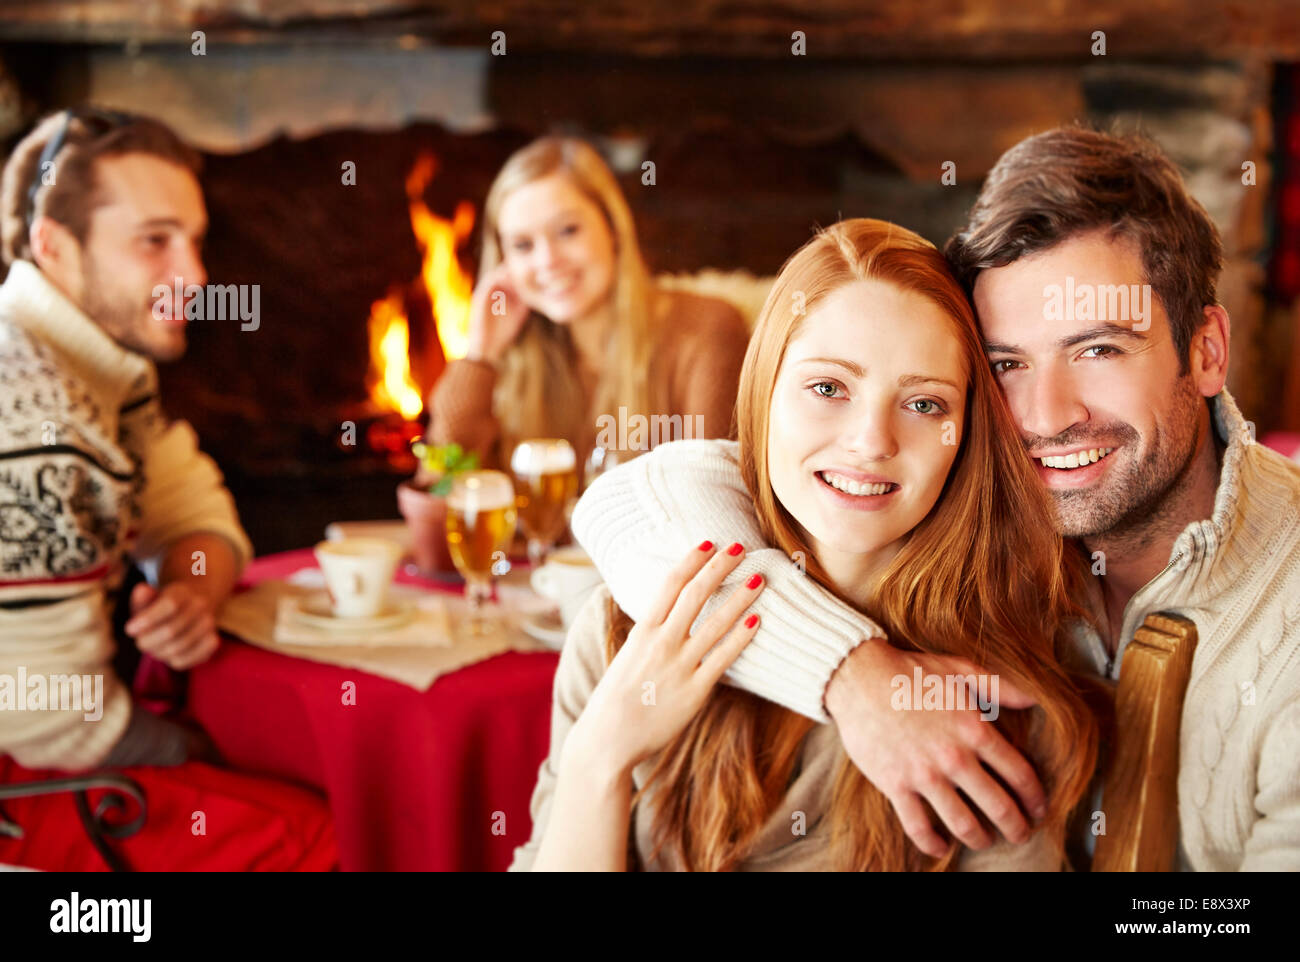 Couple hugging at restaurant with friends Stock Photo